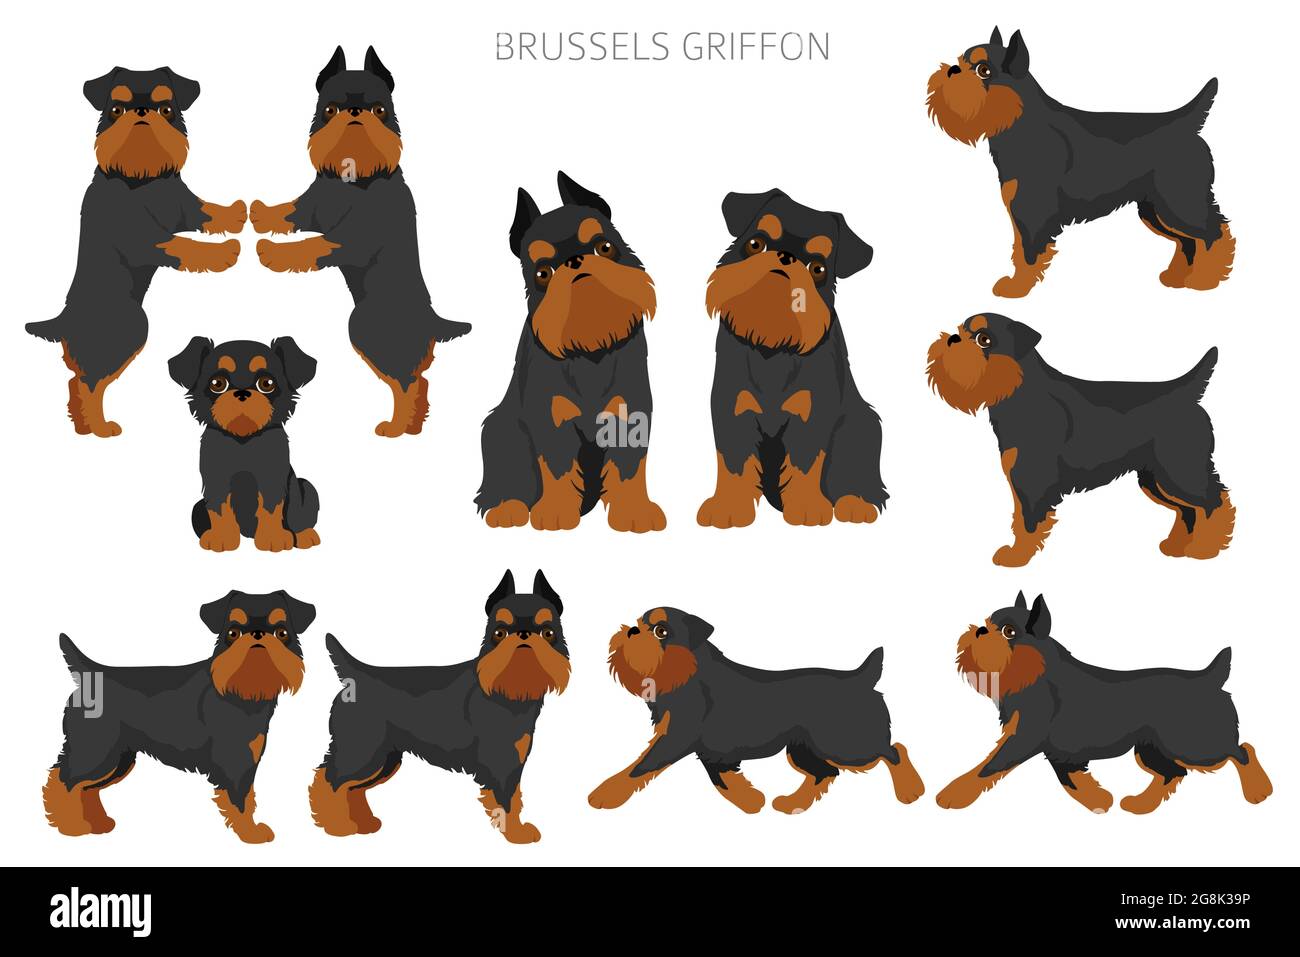 Brussels griffon clipart. Different coat colors and poses set.  Vector illustration Stock Vector